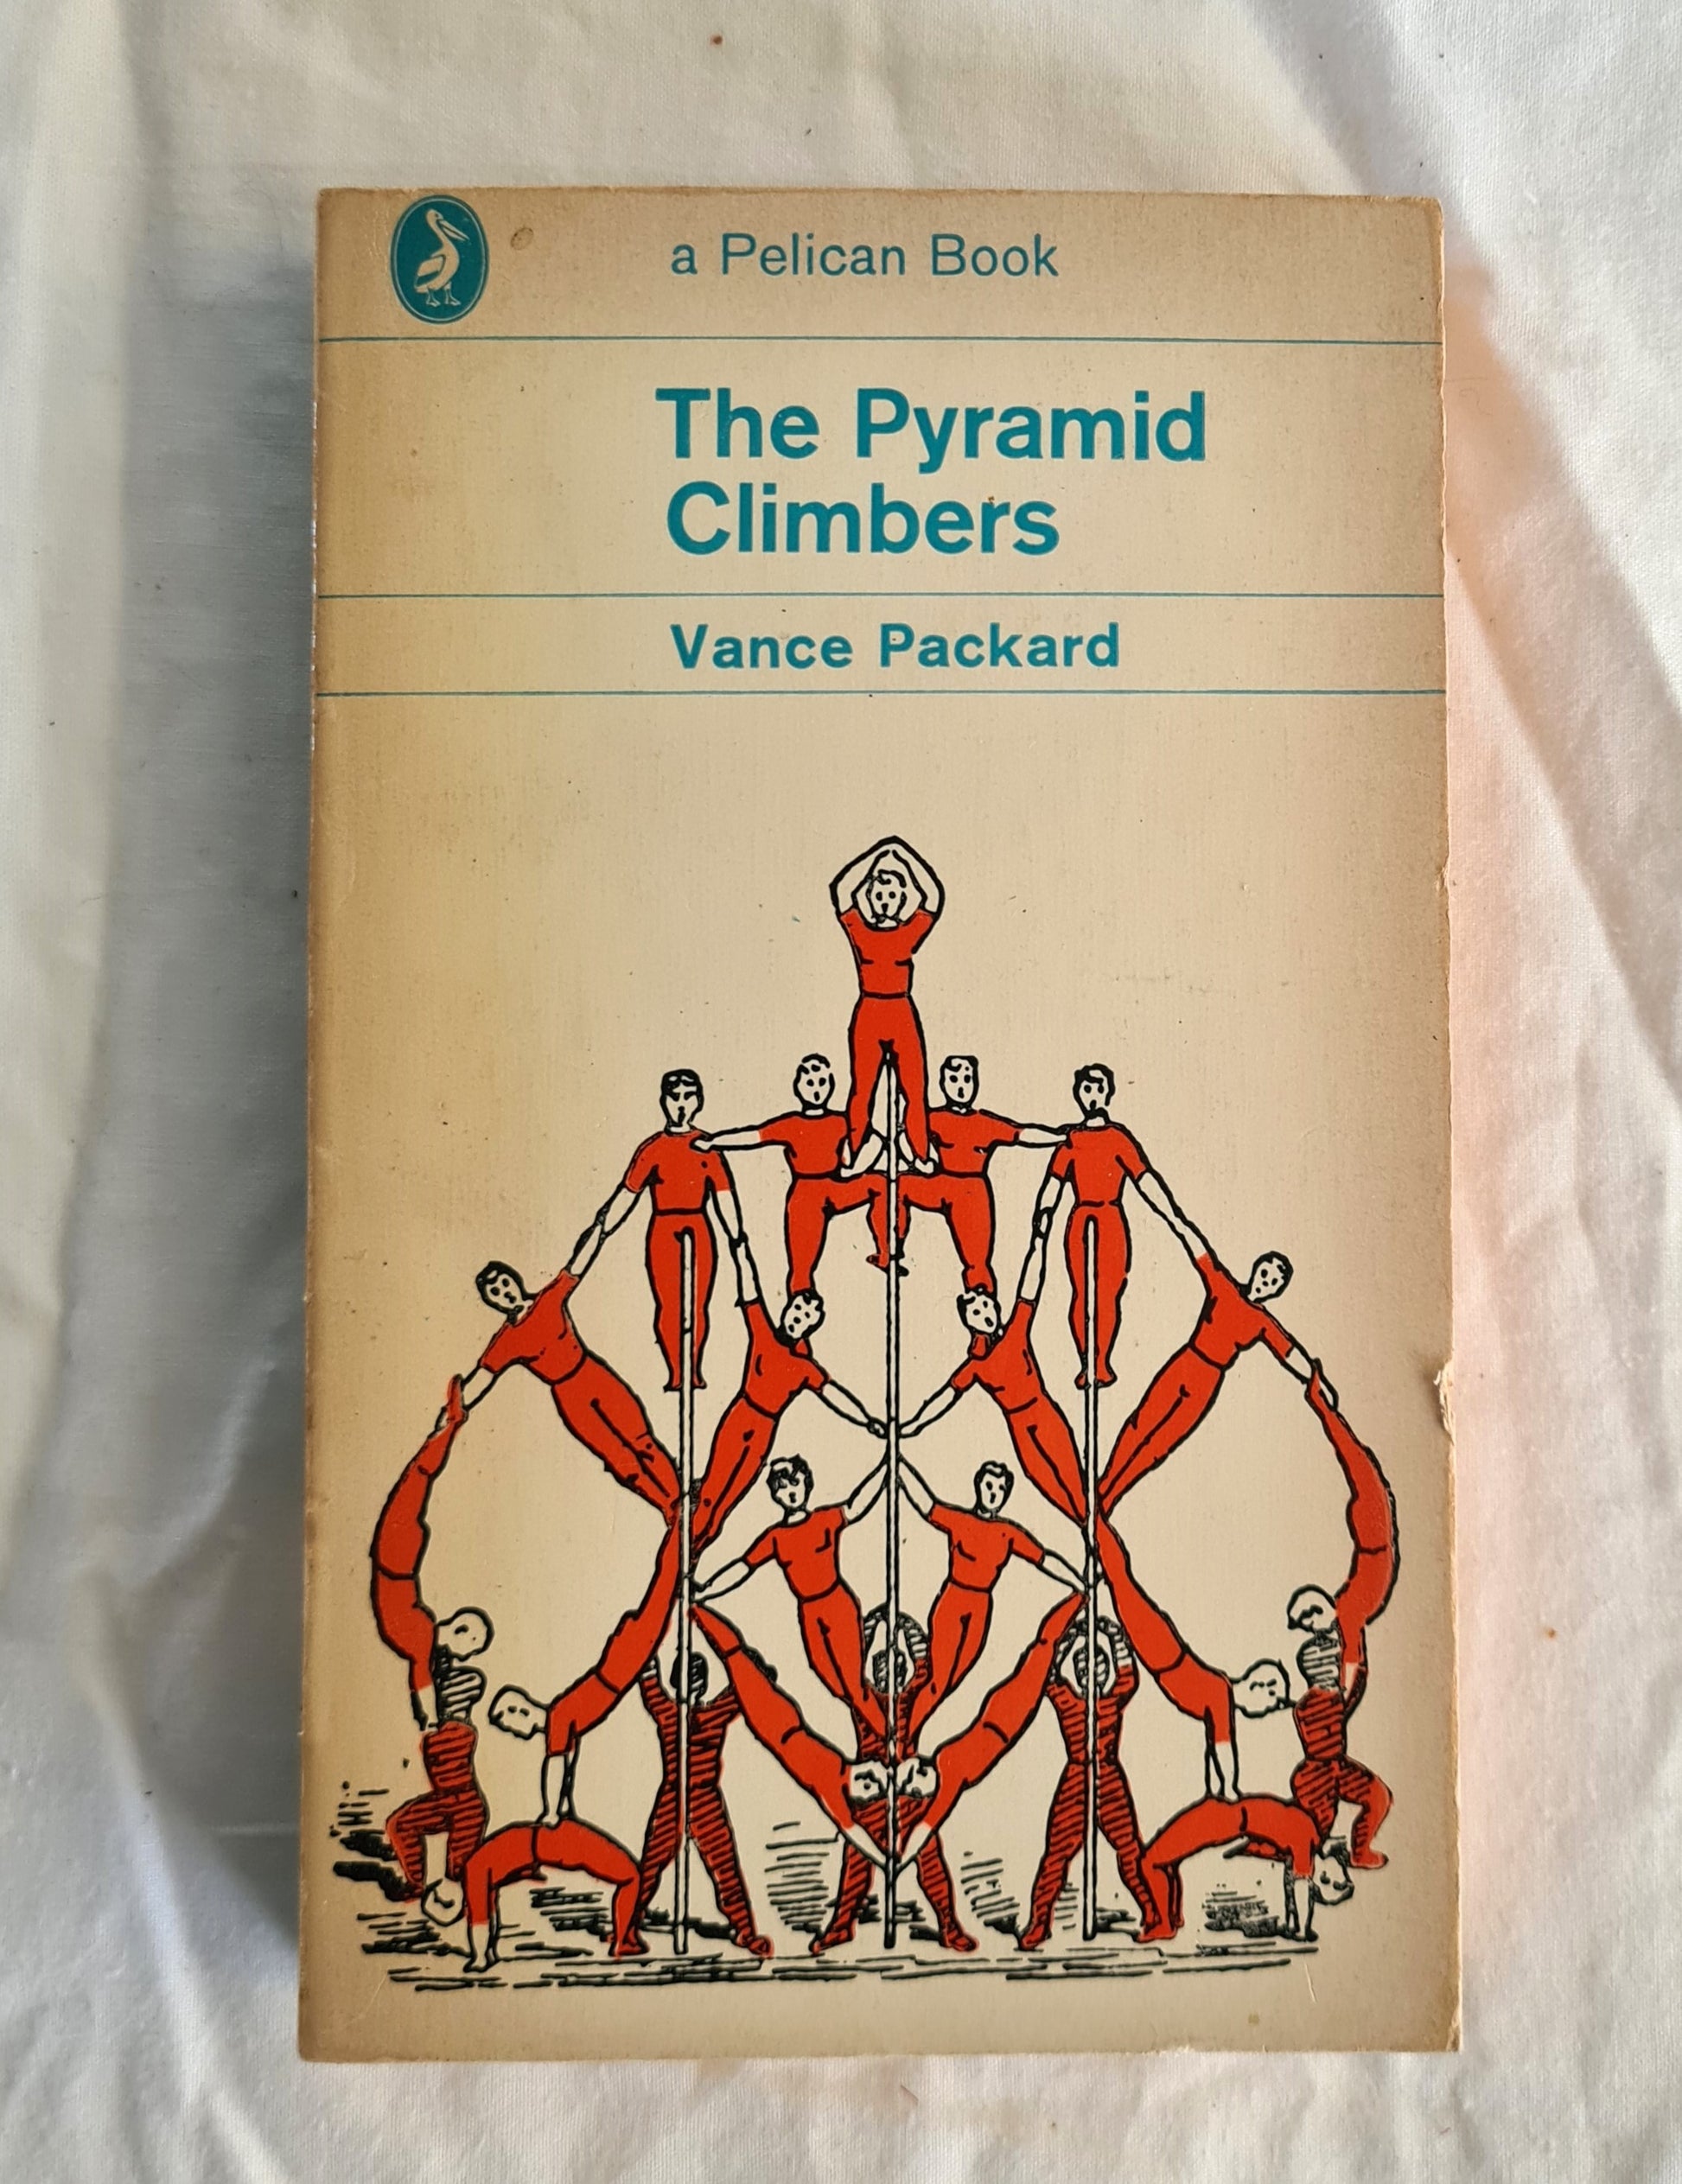 The Pyramid Climbers  by Vance Packard